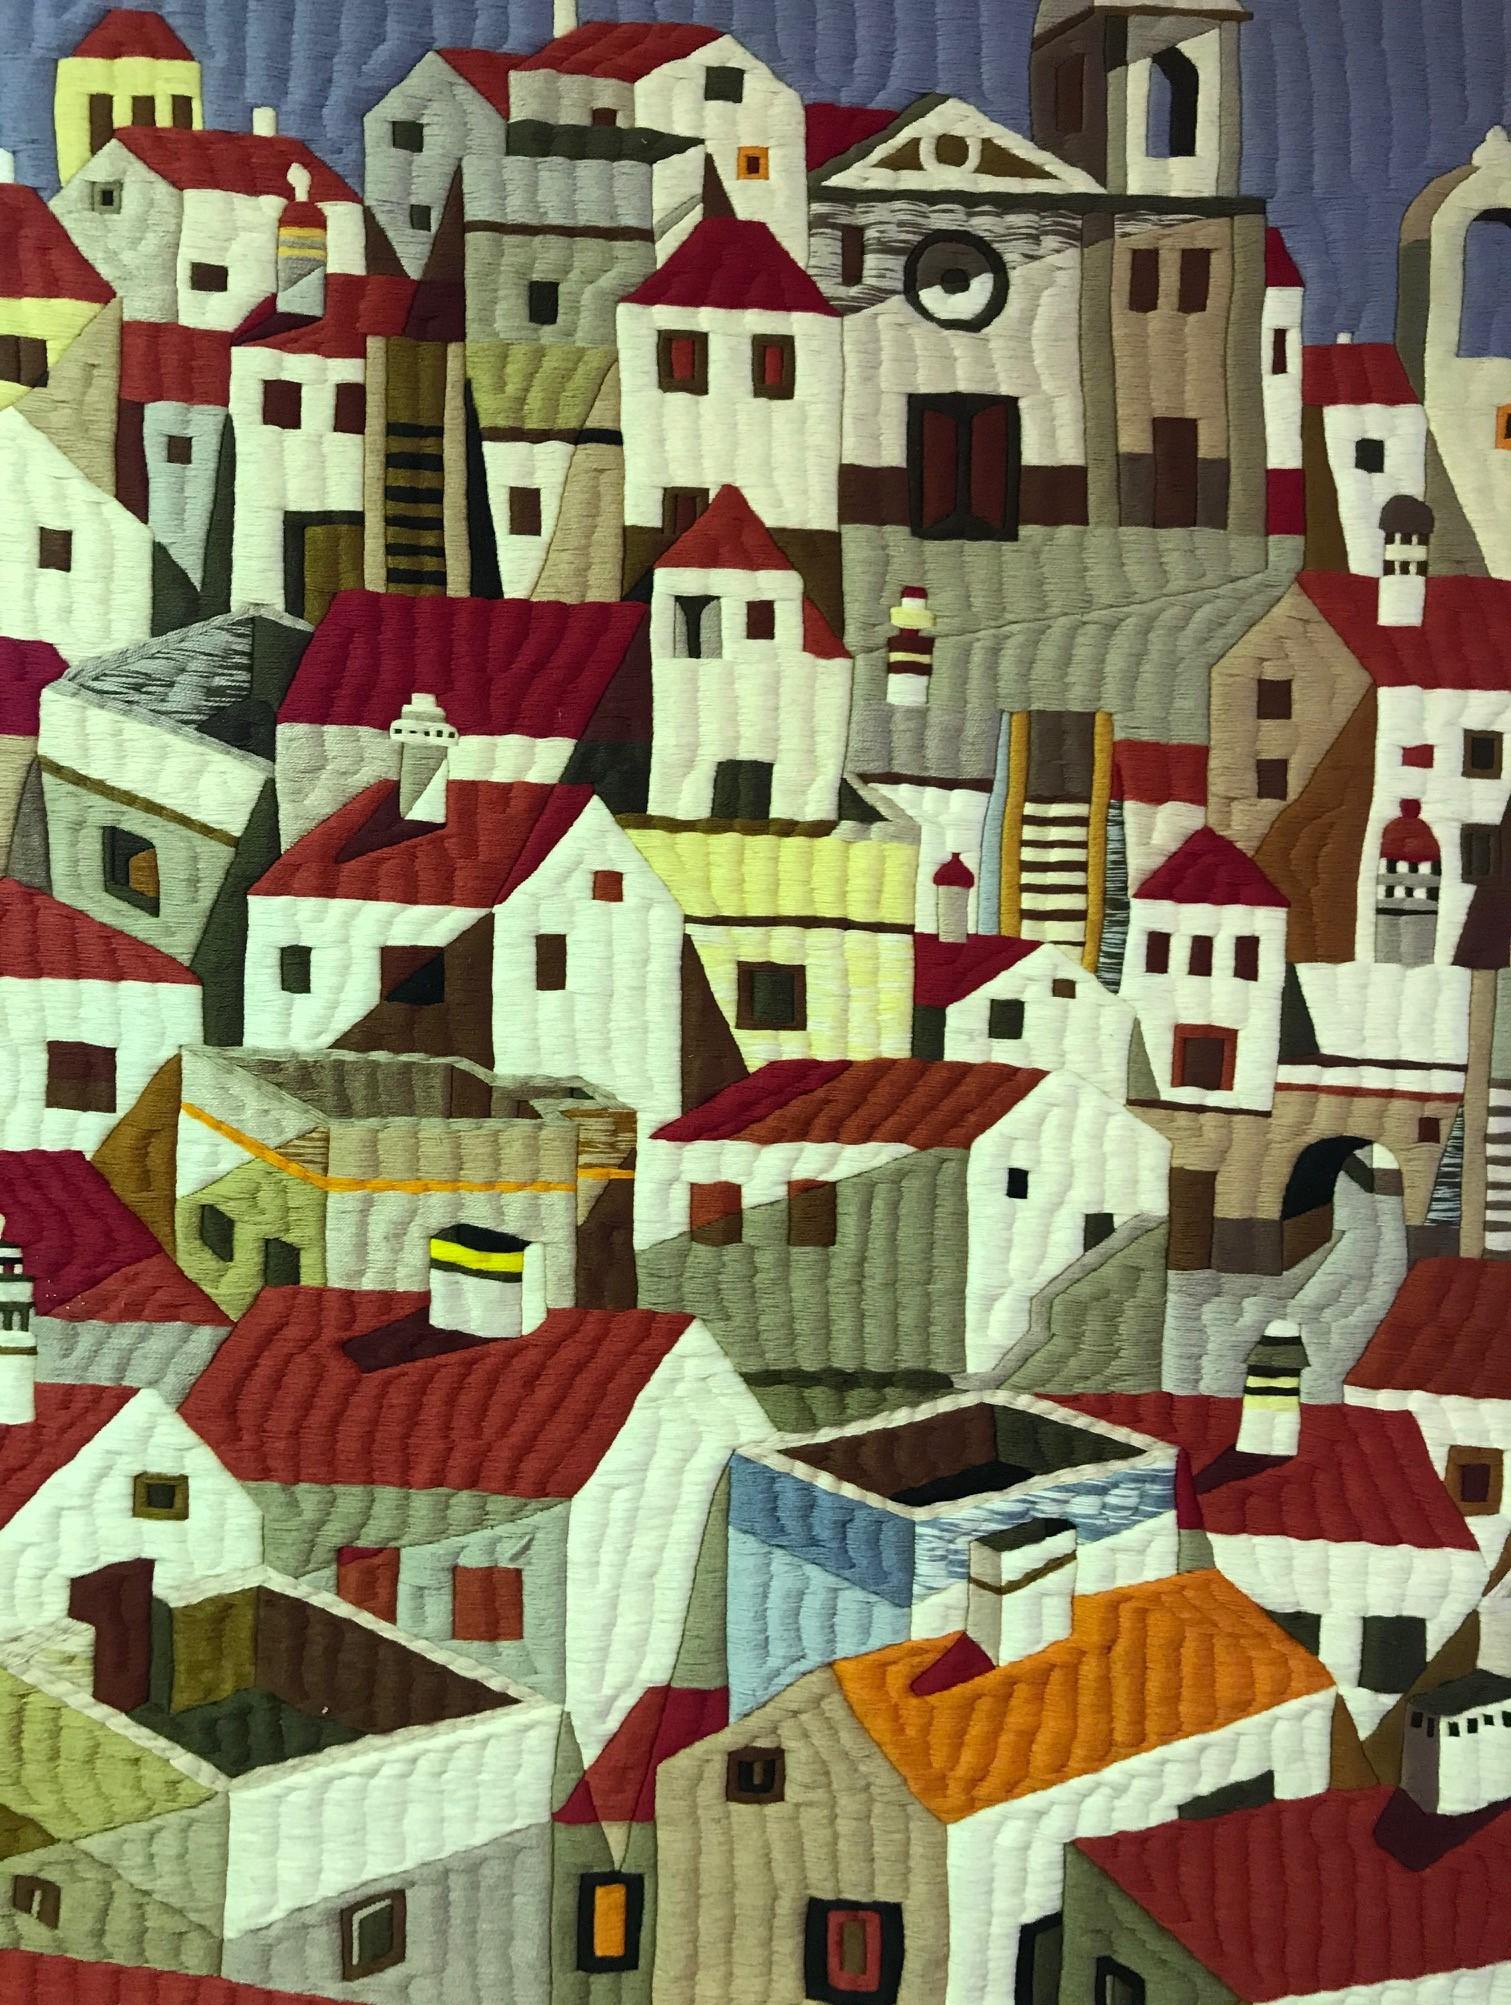 A very beautiful and quite engaging large tapestry or wall hanging by Portuguese artist Abel Bravo da Mata for Galeria Sesimbra in Lisbon, Portugal. This work of an old city landscape is still as vibrant as it was some 65 years ago.

The piece is